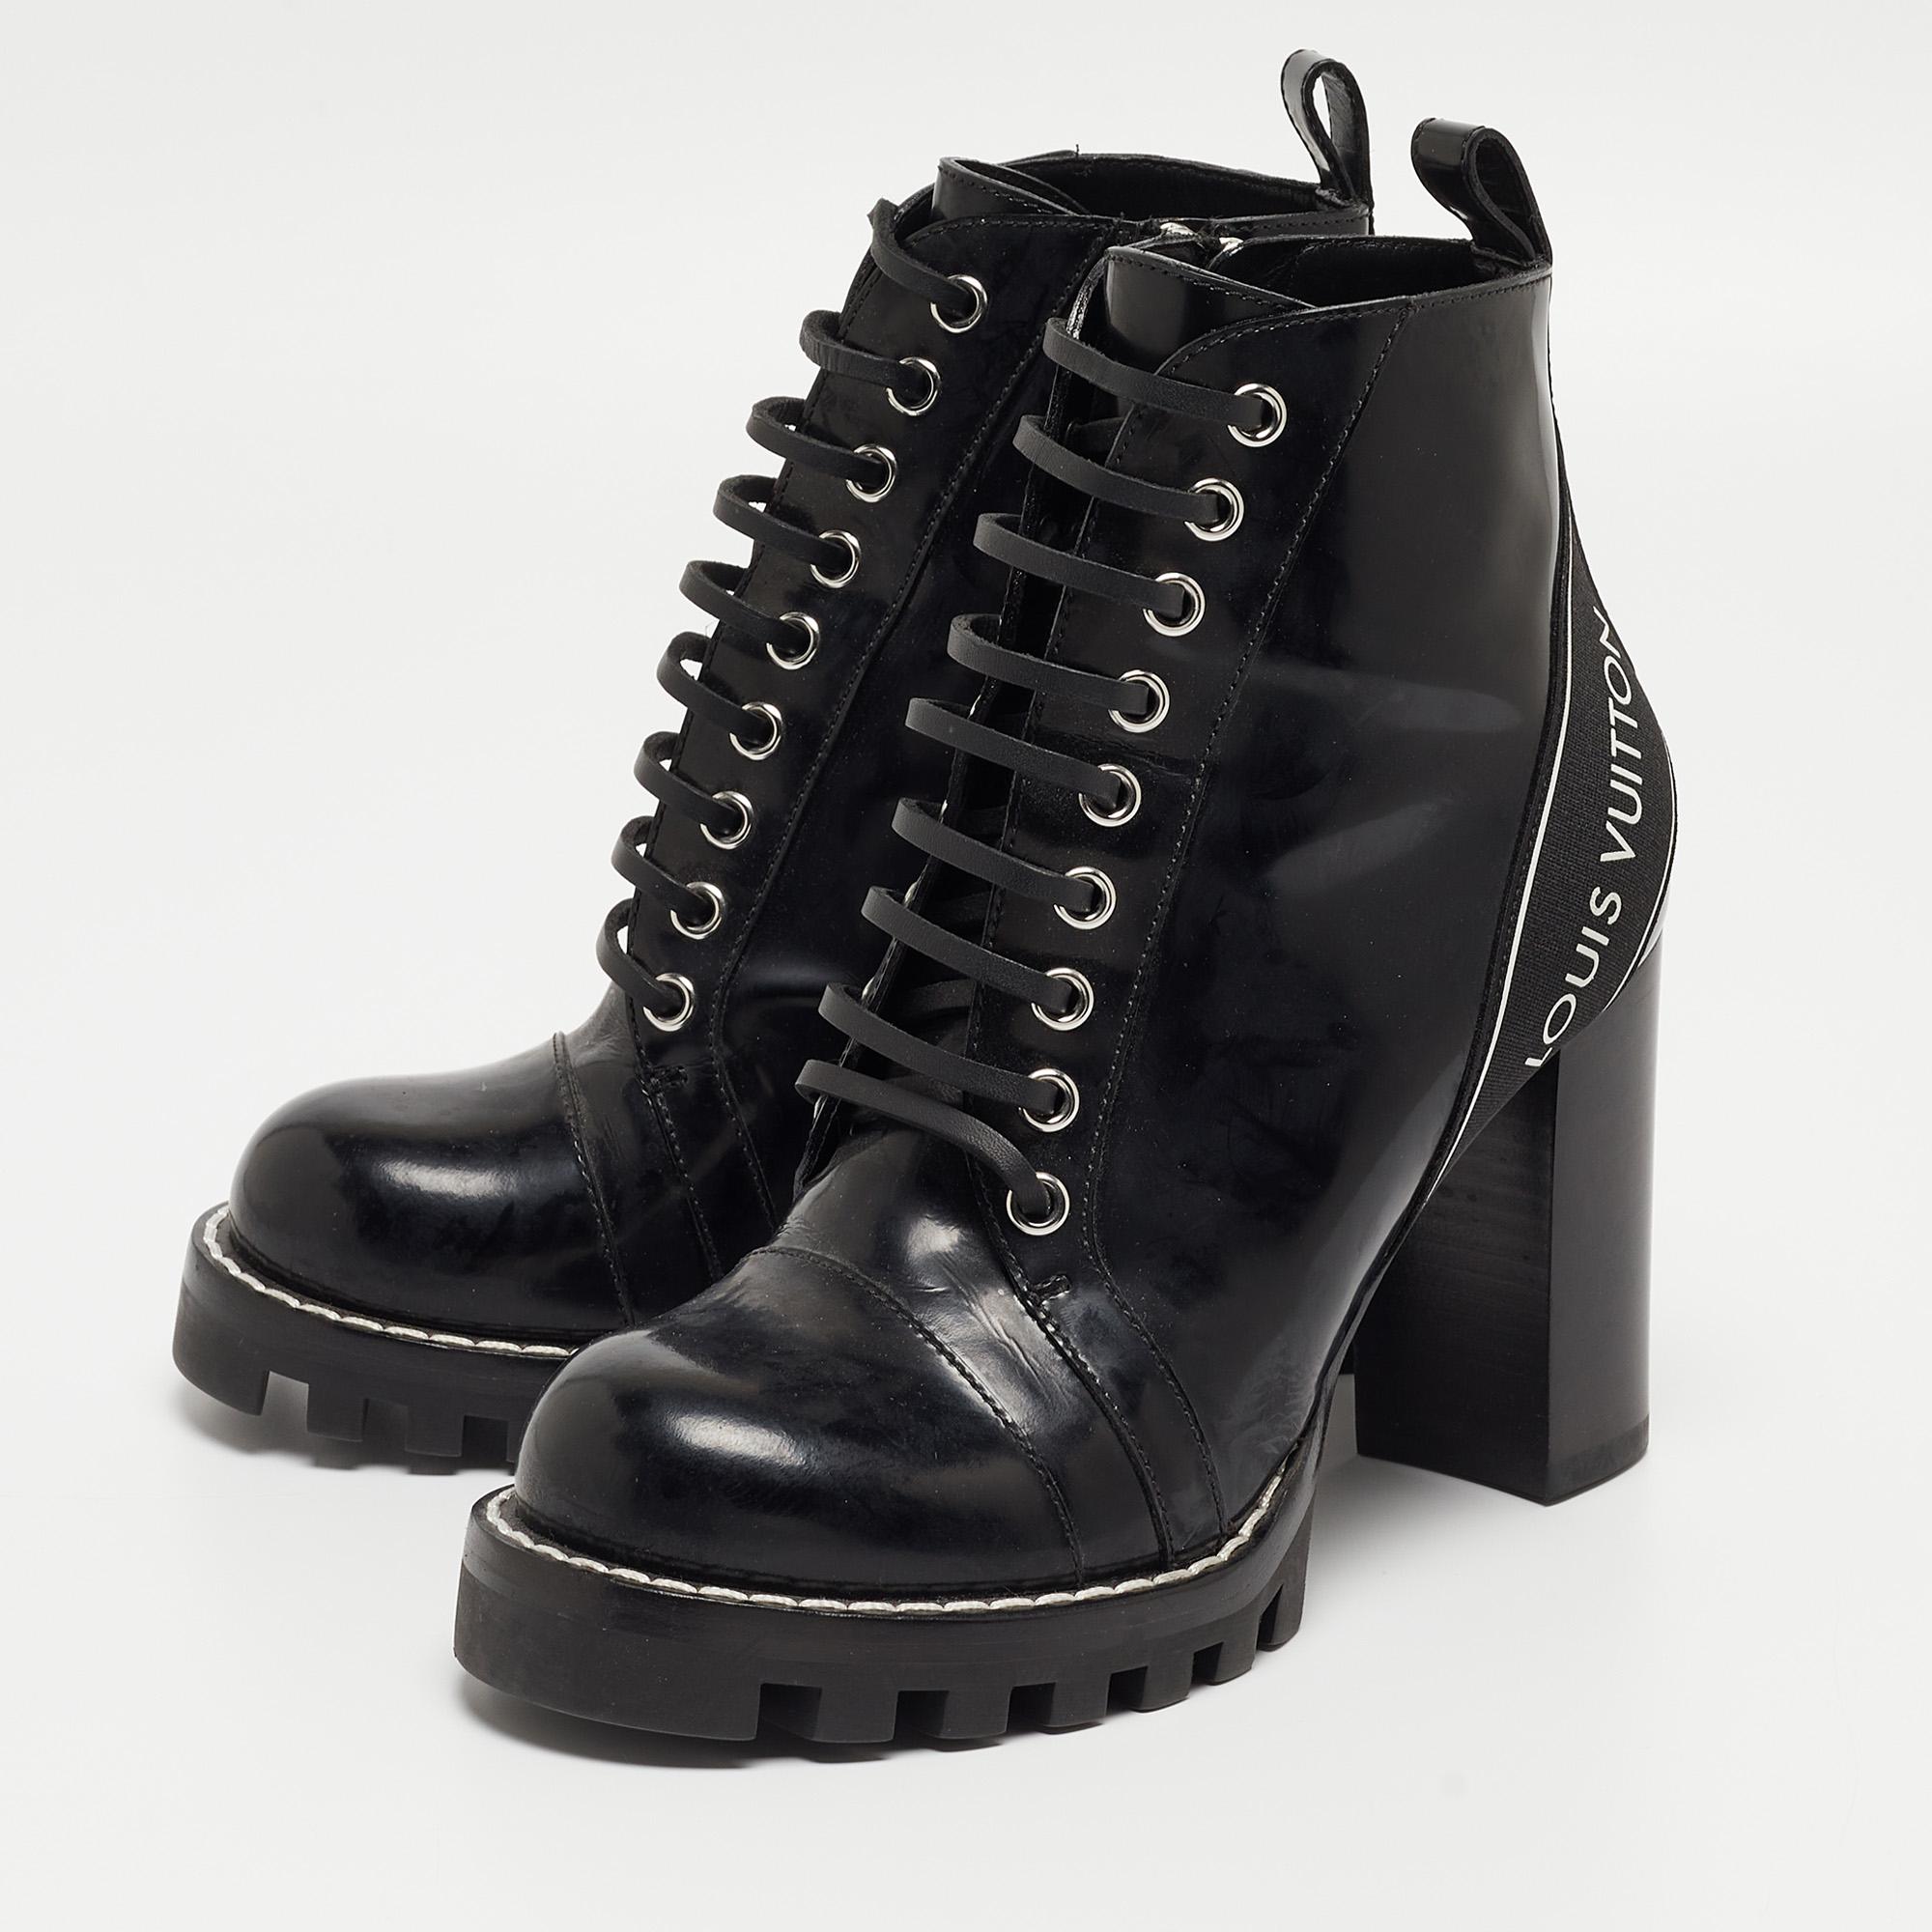 The Star Trail boots from Louis Vuitton are a familiar sight. They are characterized by chunky heels, platforms, and laces along the vamps. This pair, crafted from leather, will have you wanting to experiment with the clothes in your closet.

